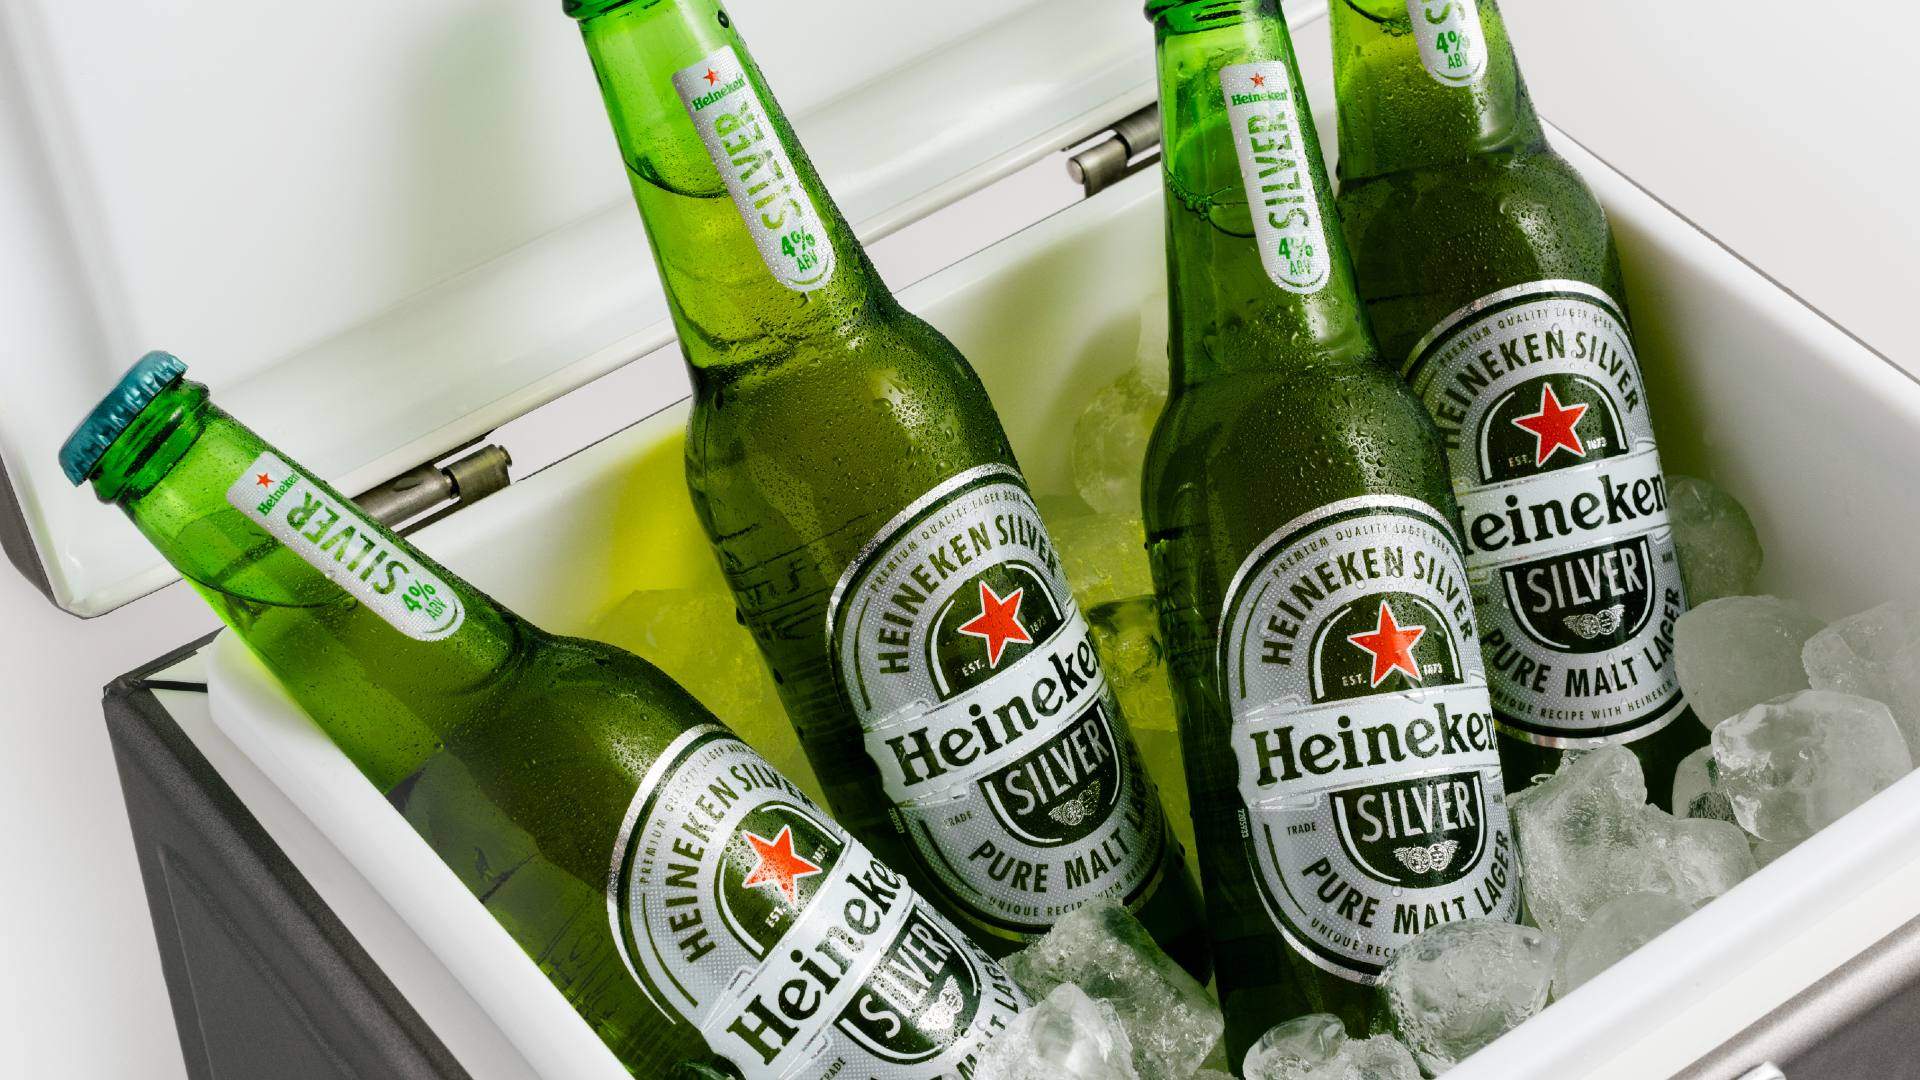 Heineken Has Launched a New Beer — and It's Using Science to Decide If You Like It More Than the Original